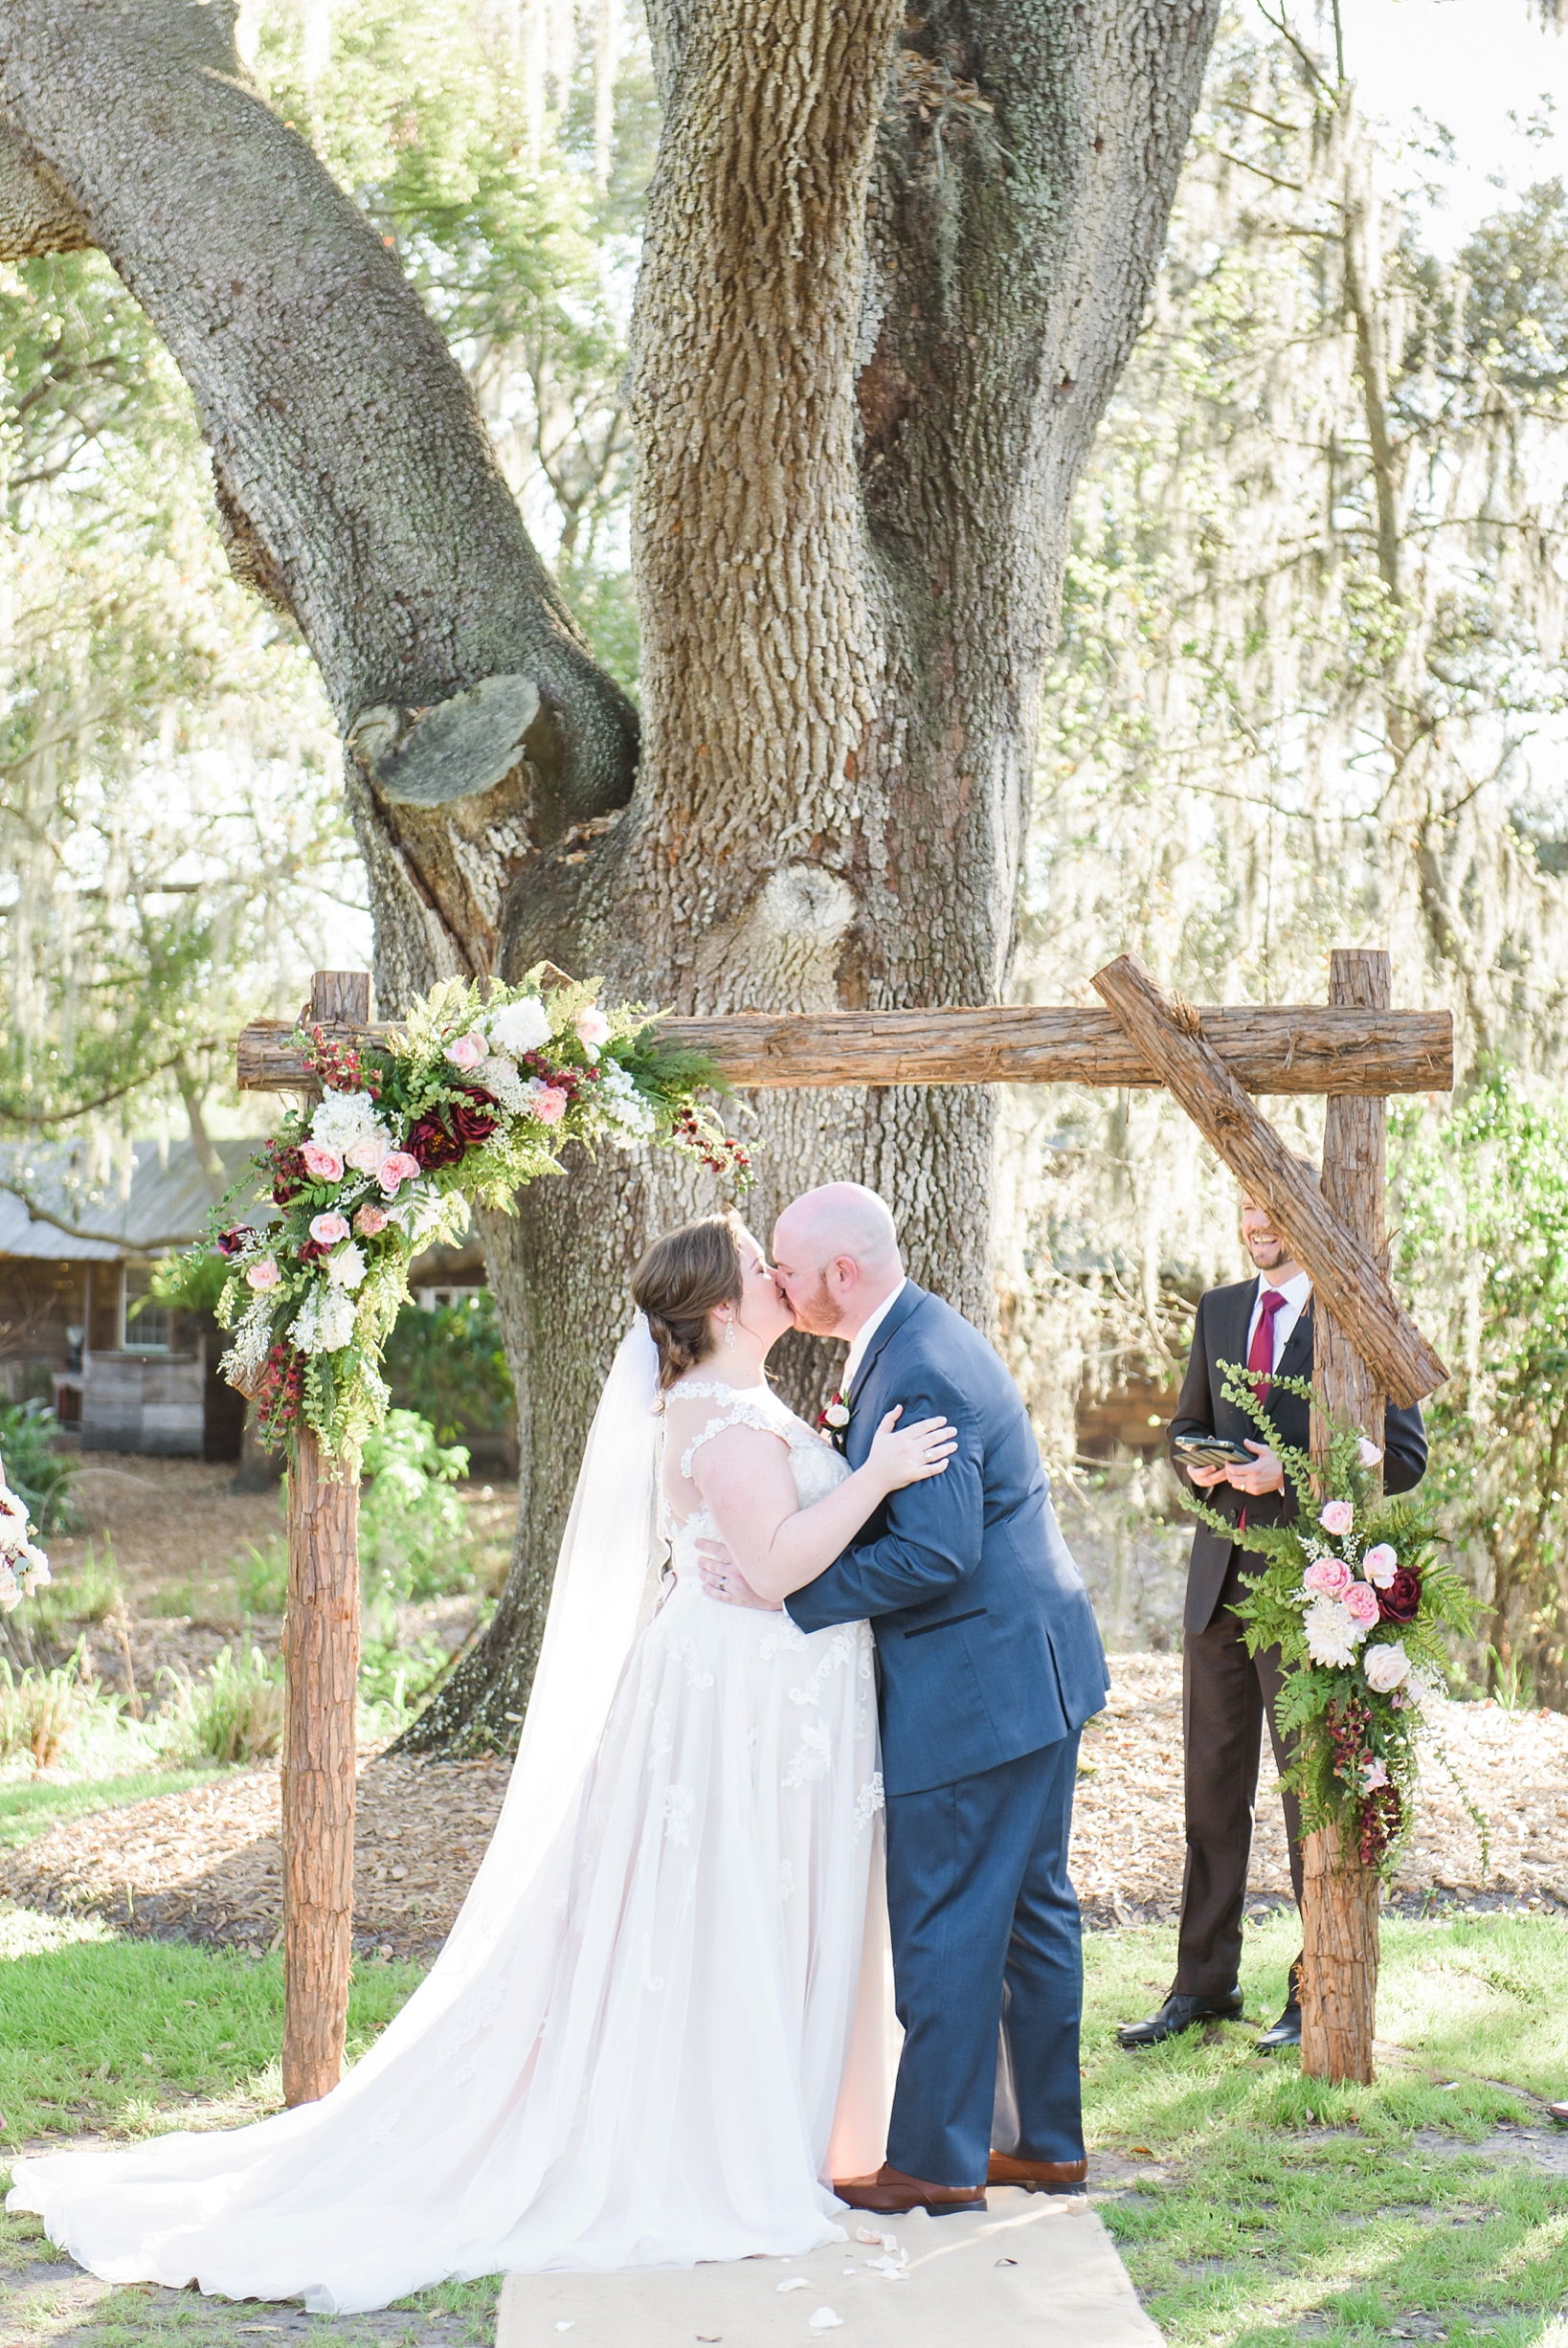 First Kiss with floral wedding altar